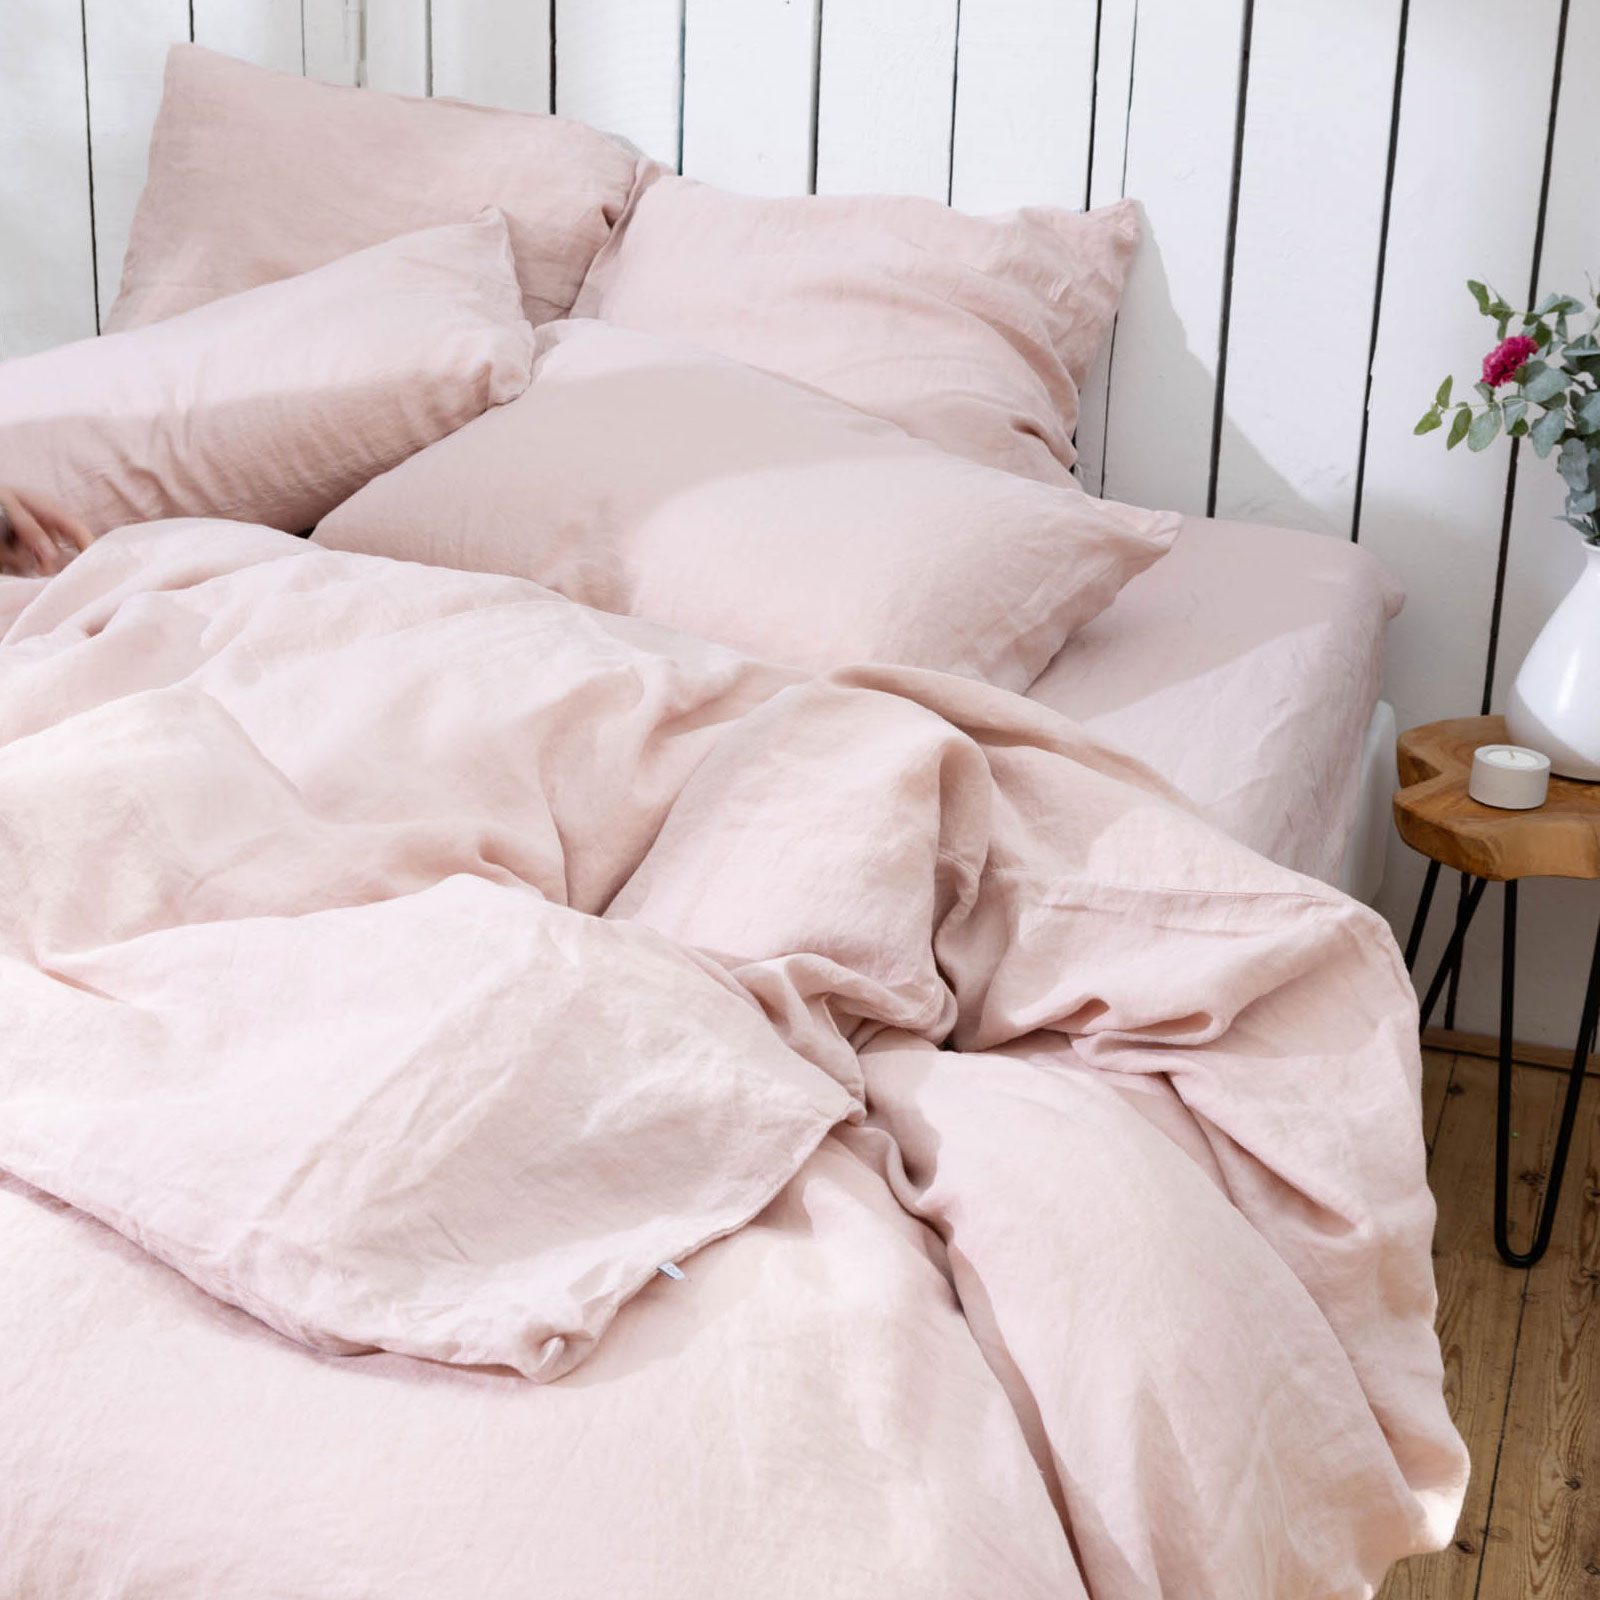 stone-washed-linen-duvet-cover-powder-pink-3